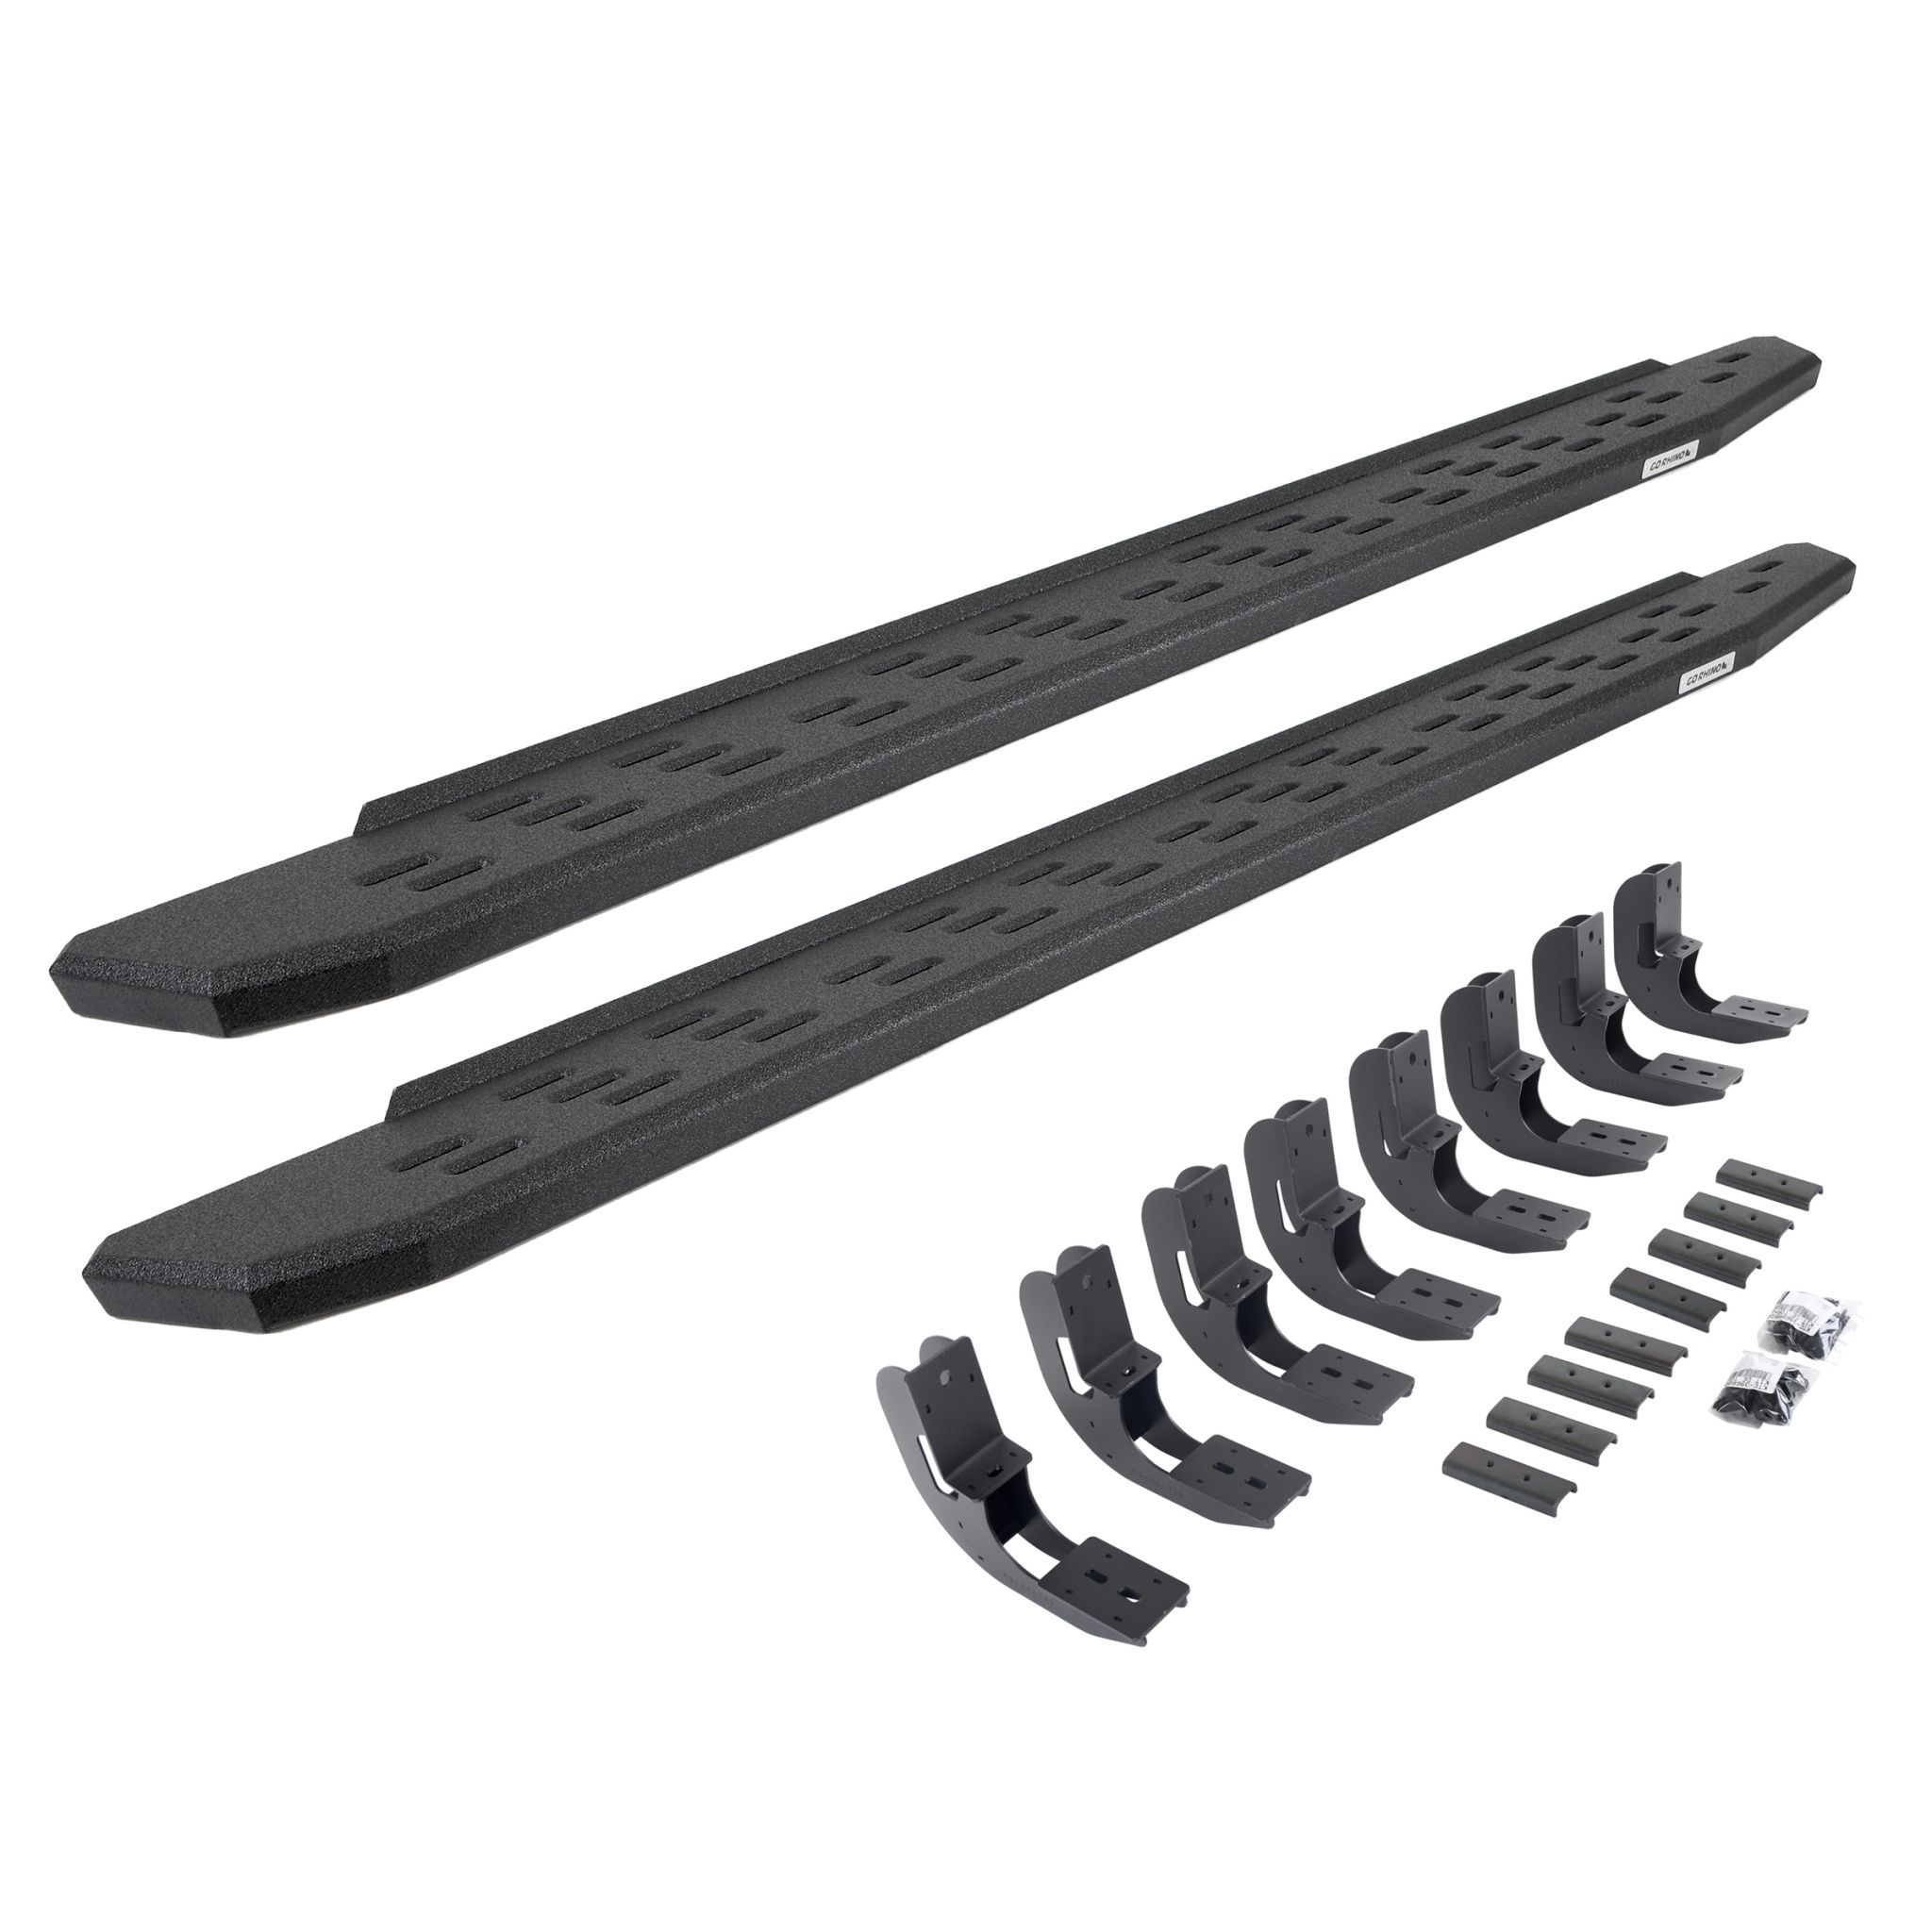 Go Rhino 69604880T - RB30 Running Boards with Mounting Bracket Kit - Protective Bedliner Coating